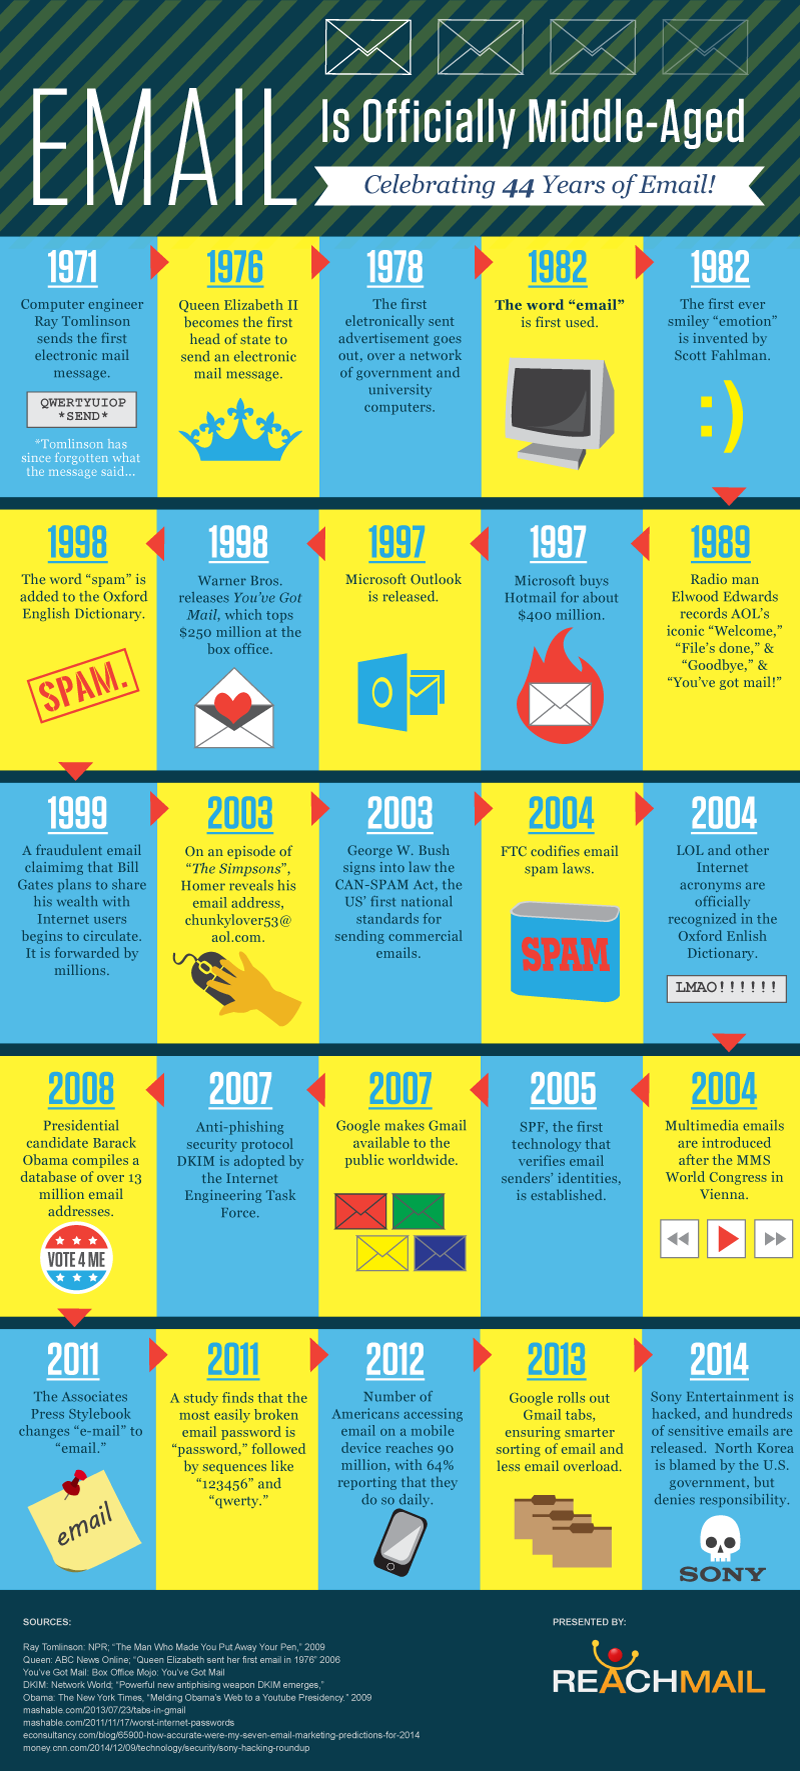 History of email in infographic